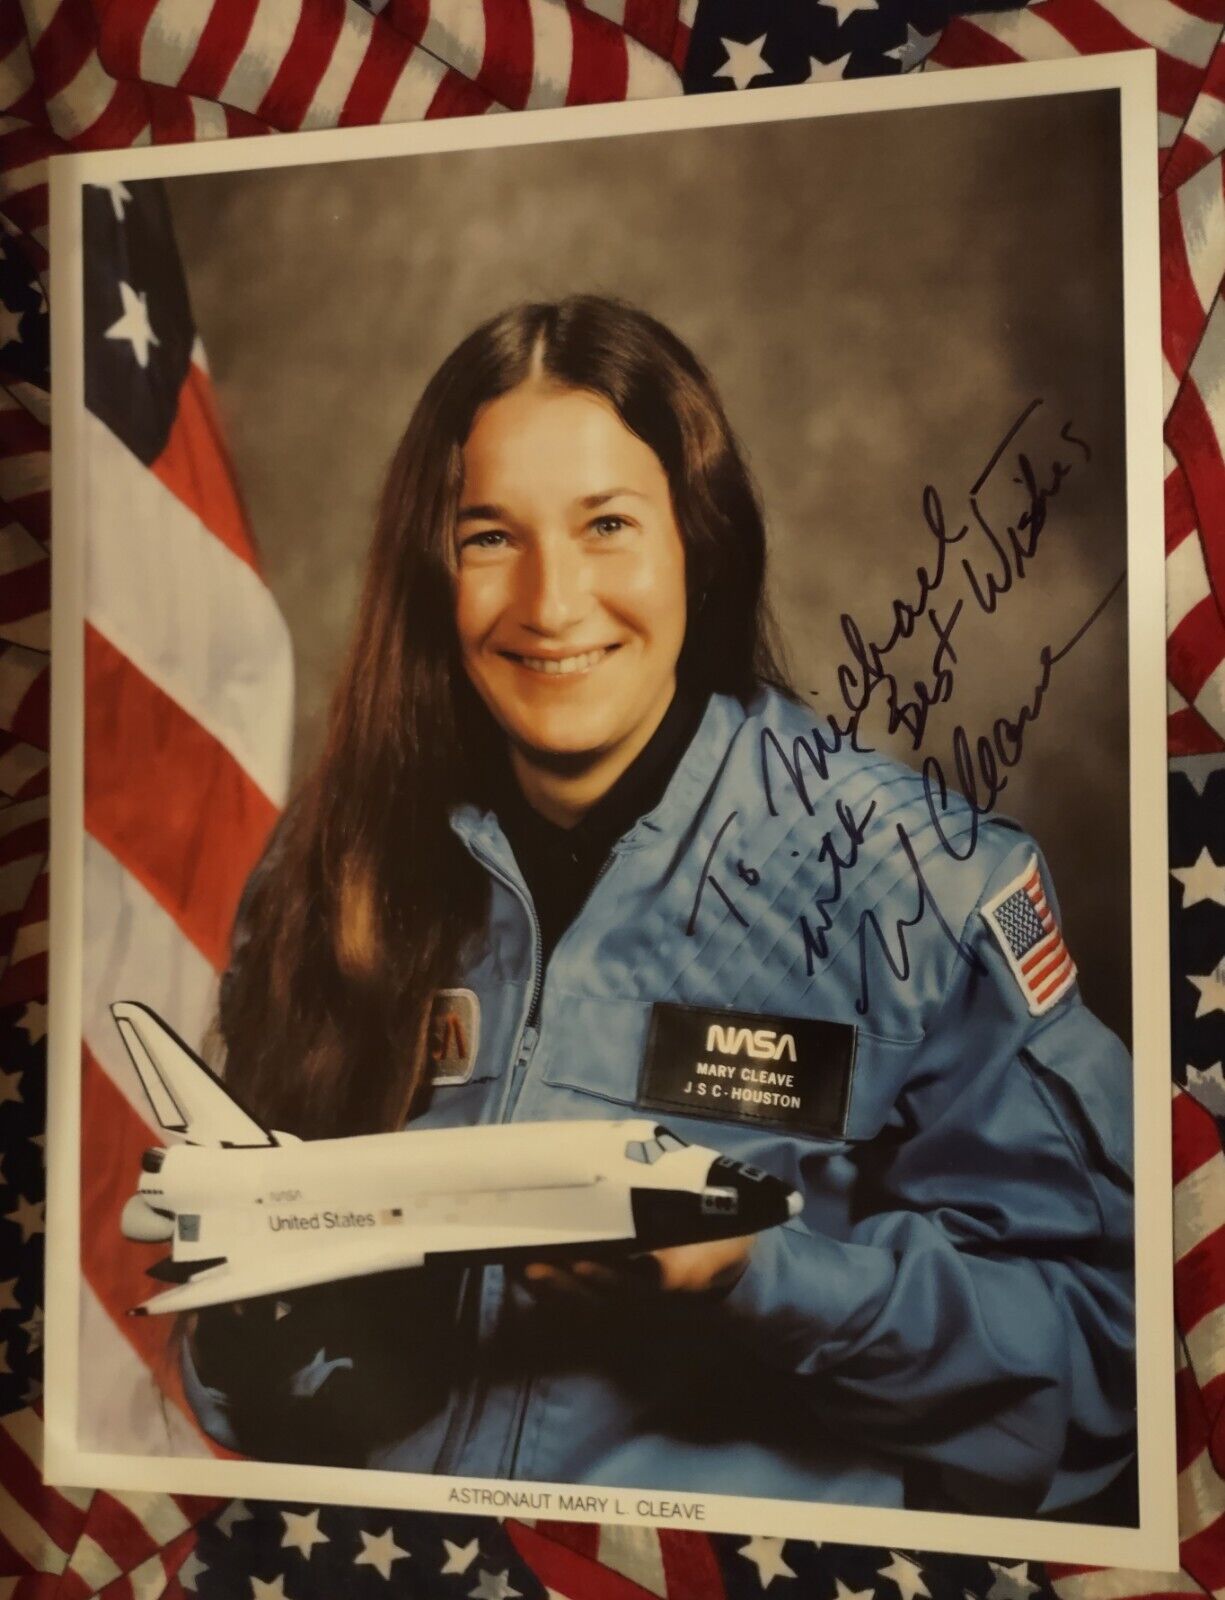 MARY L. CLEAVE NASA Women Astronaut - Autographed Official NASA 8x10 Photo 1991